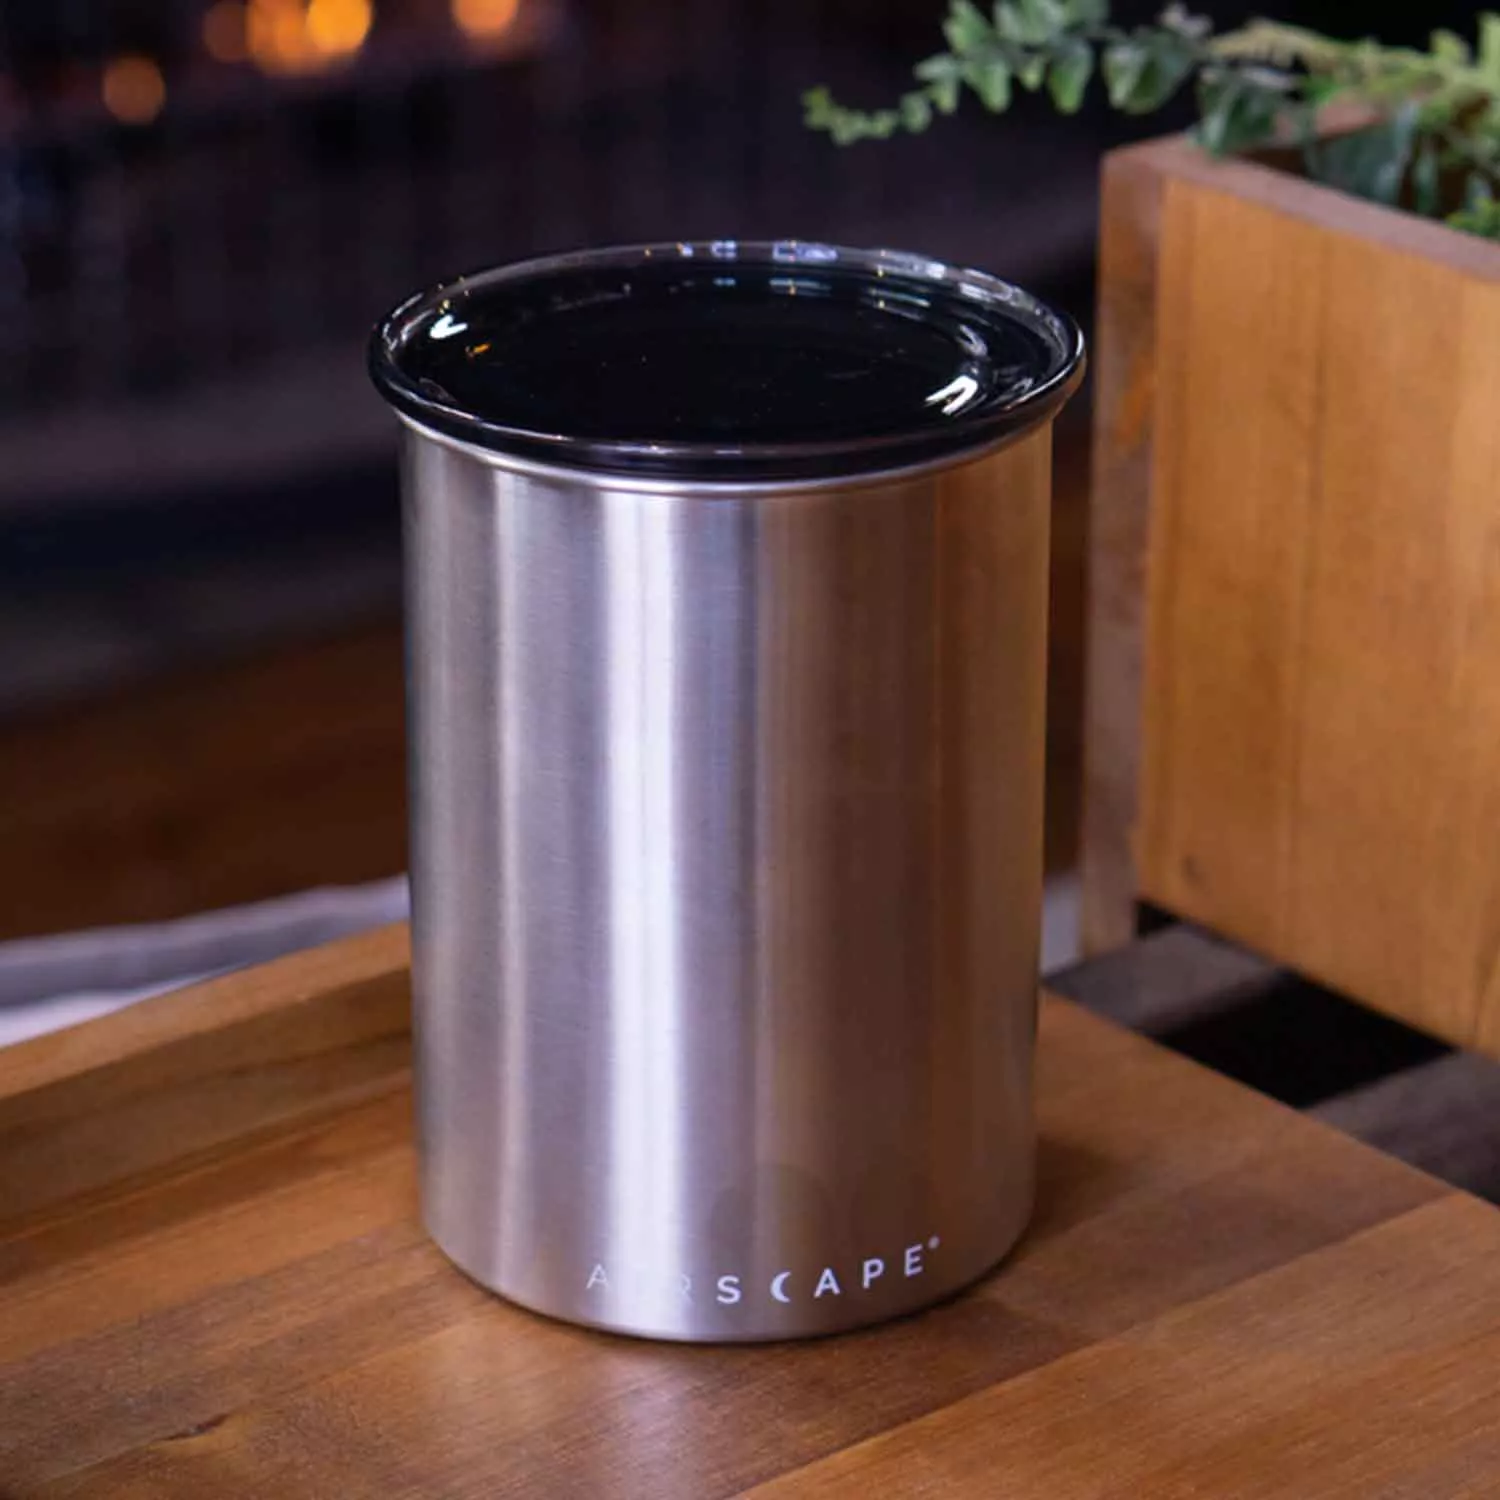 Airscape Coffee Canister Review 2024